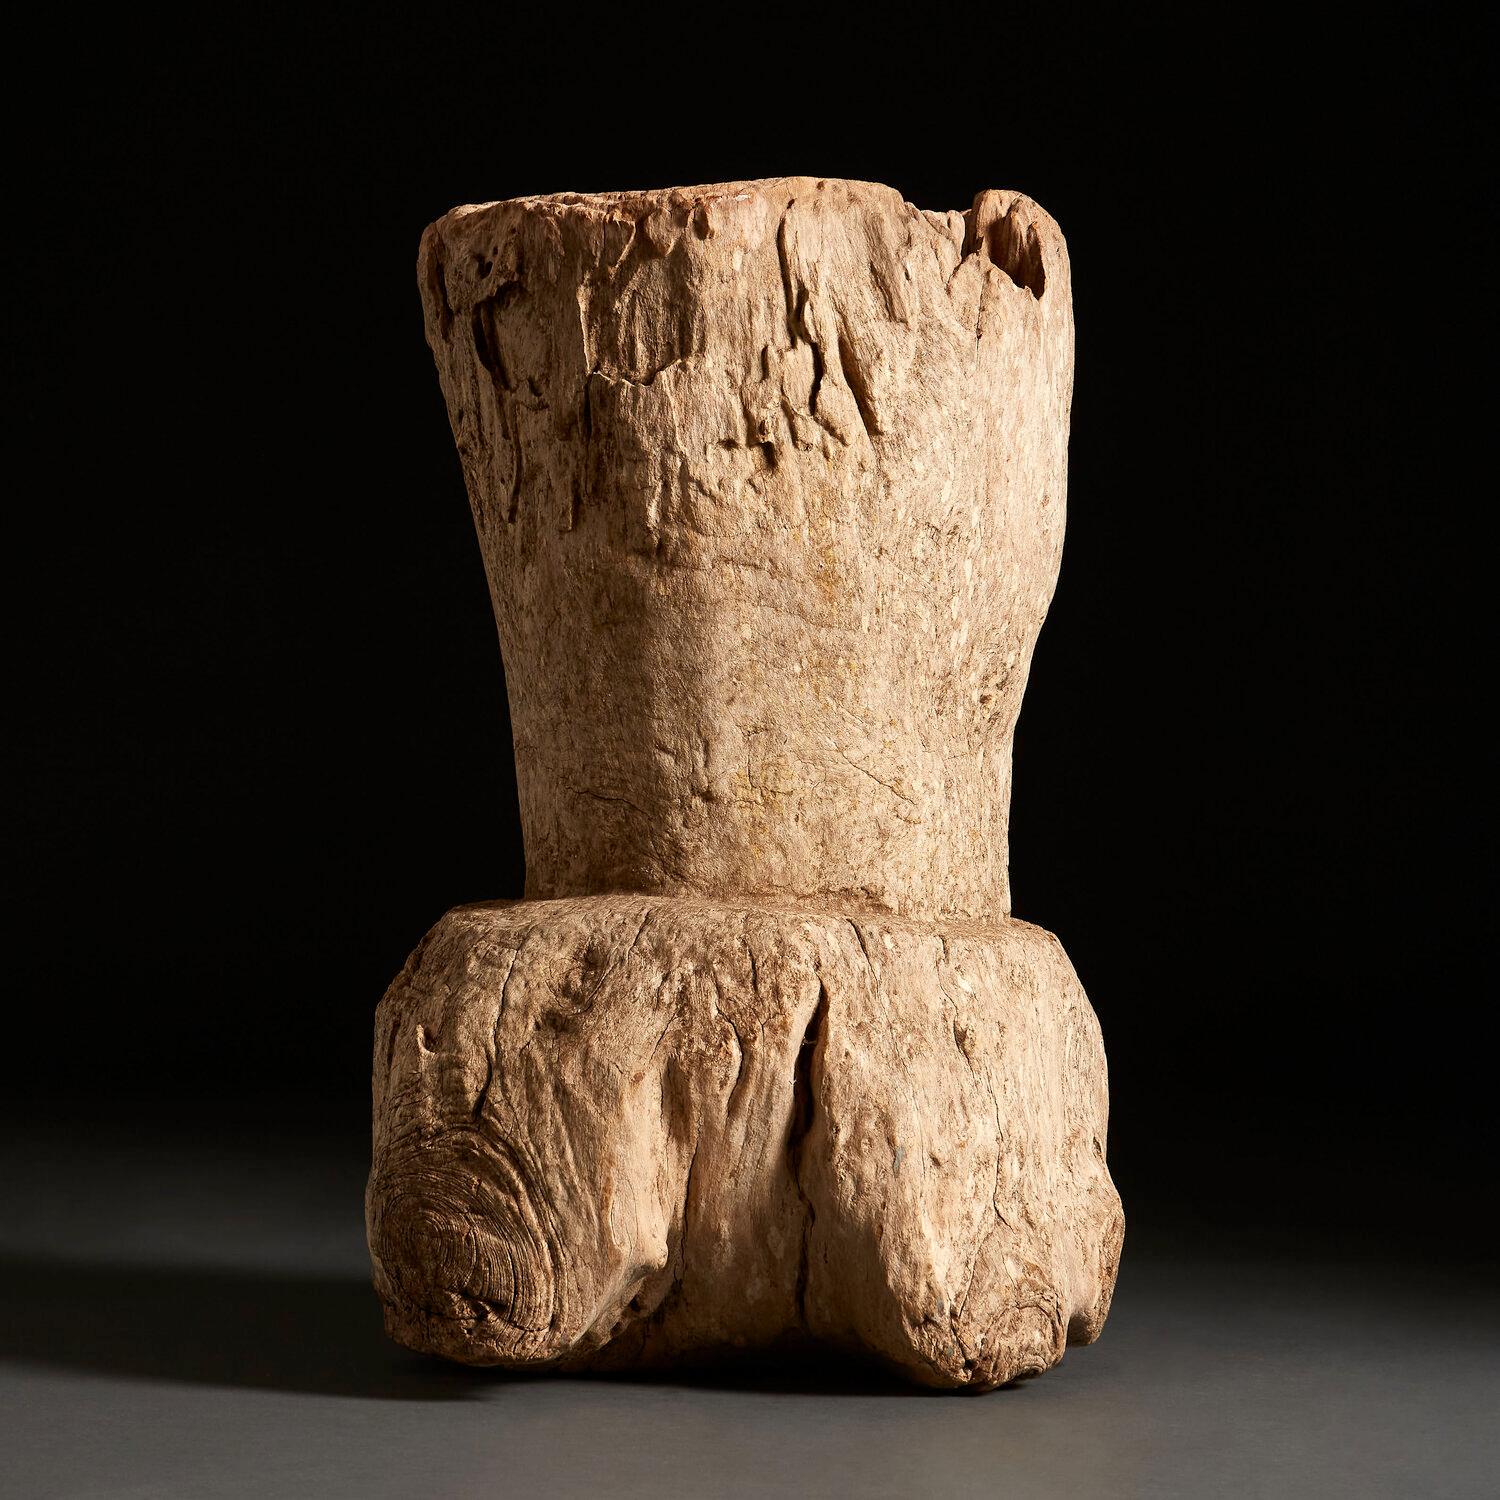 A large root wood form with hollowed centre, with knots to the surface throughout. Possibly a mortar, or for use as a stick stand.